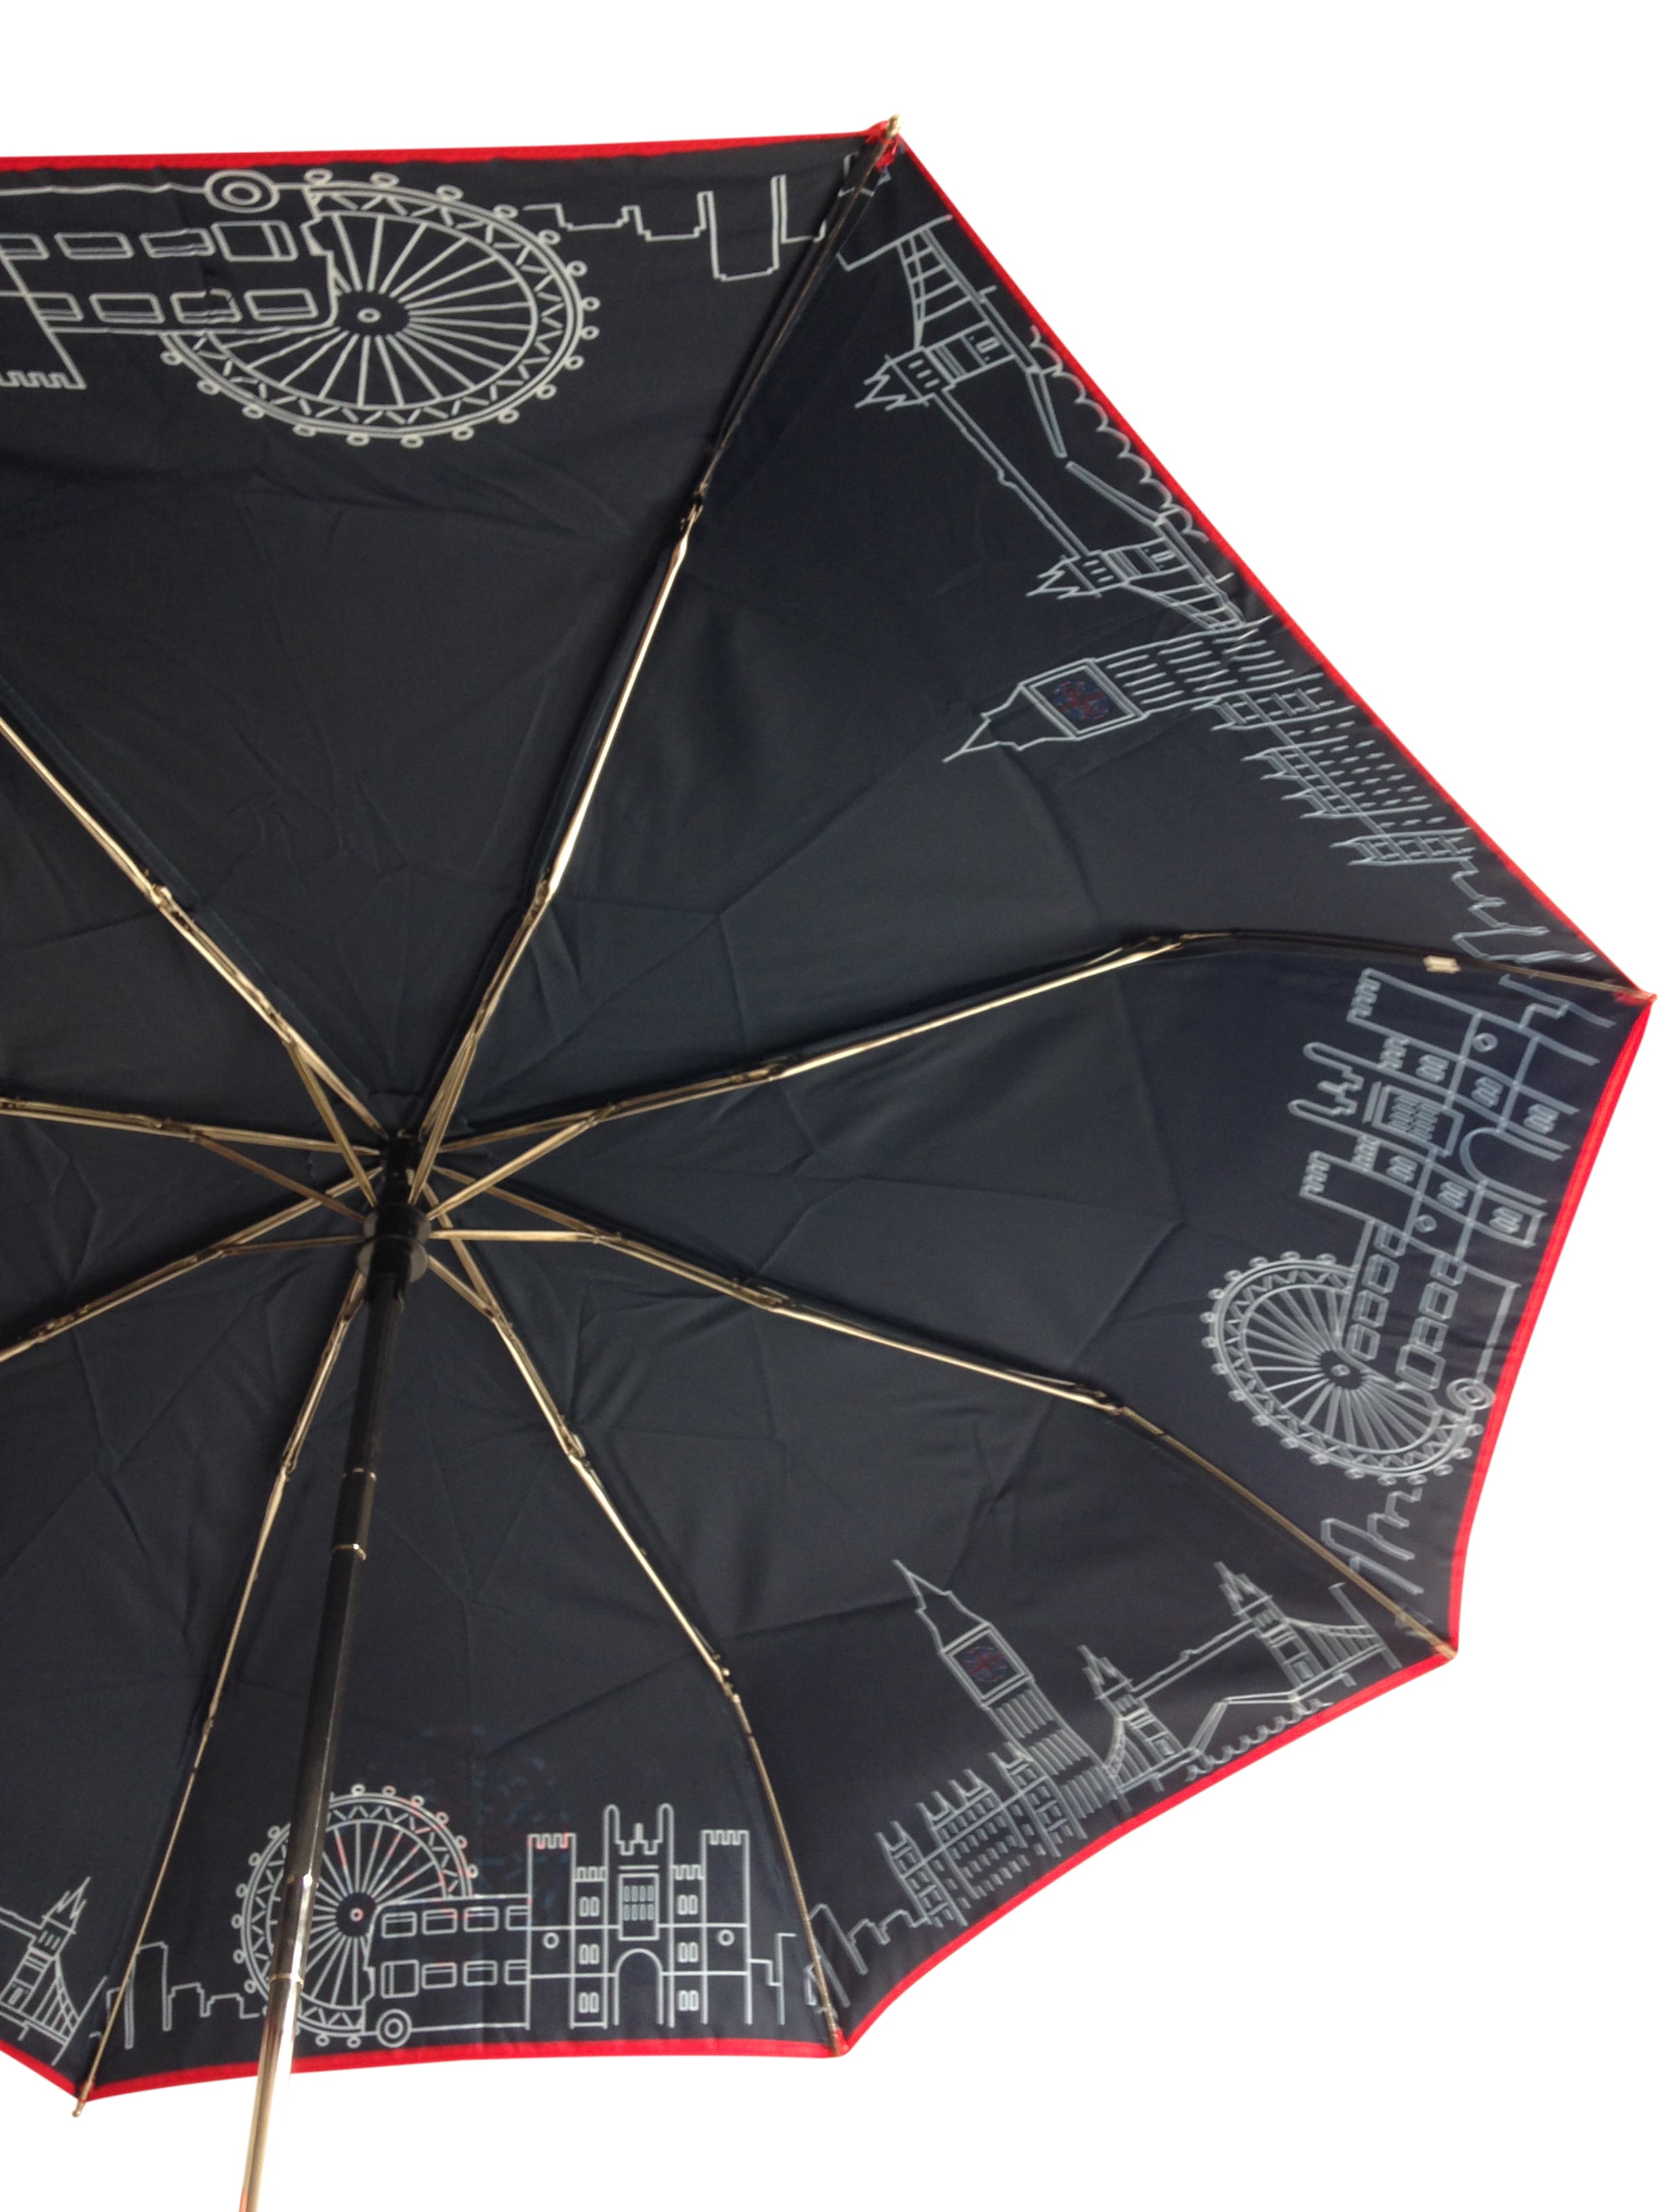 auto-folding-umbrella-with-red-edging-and-london-graphic-on-internal-canopy